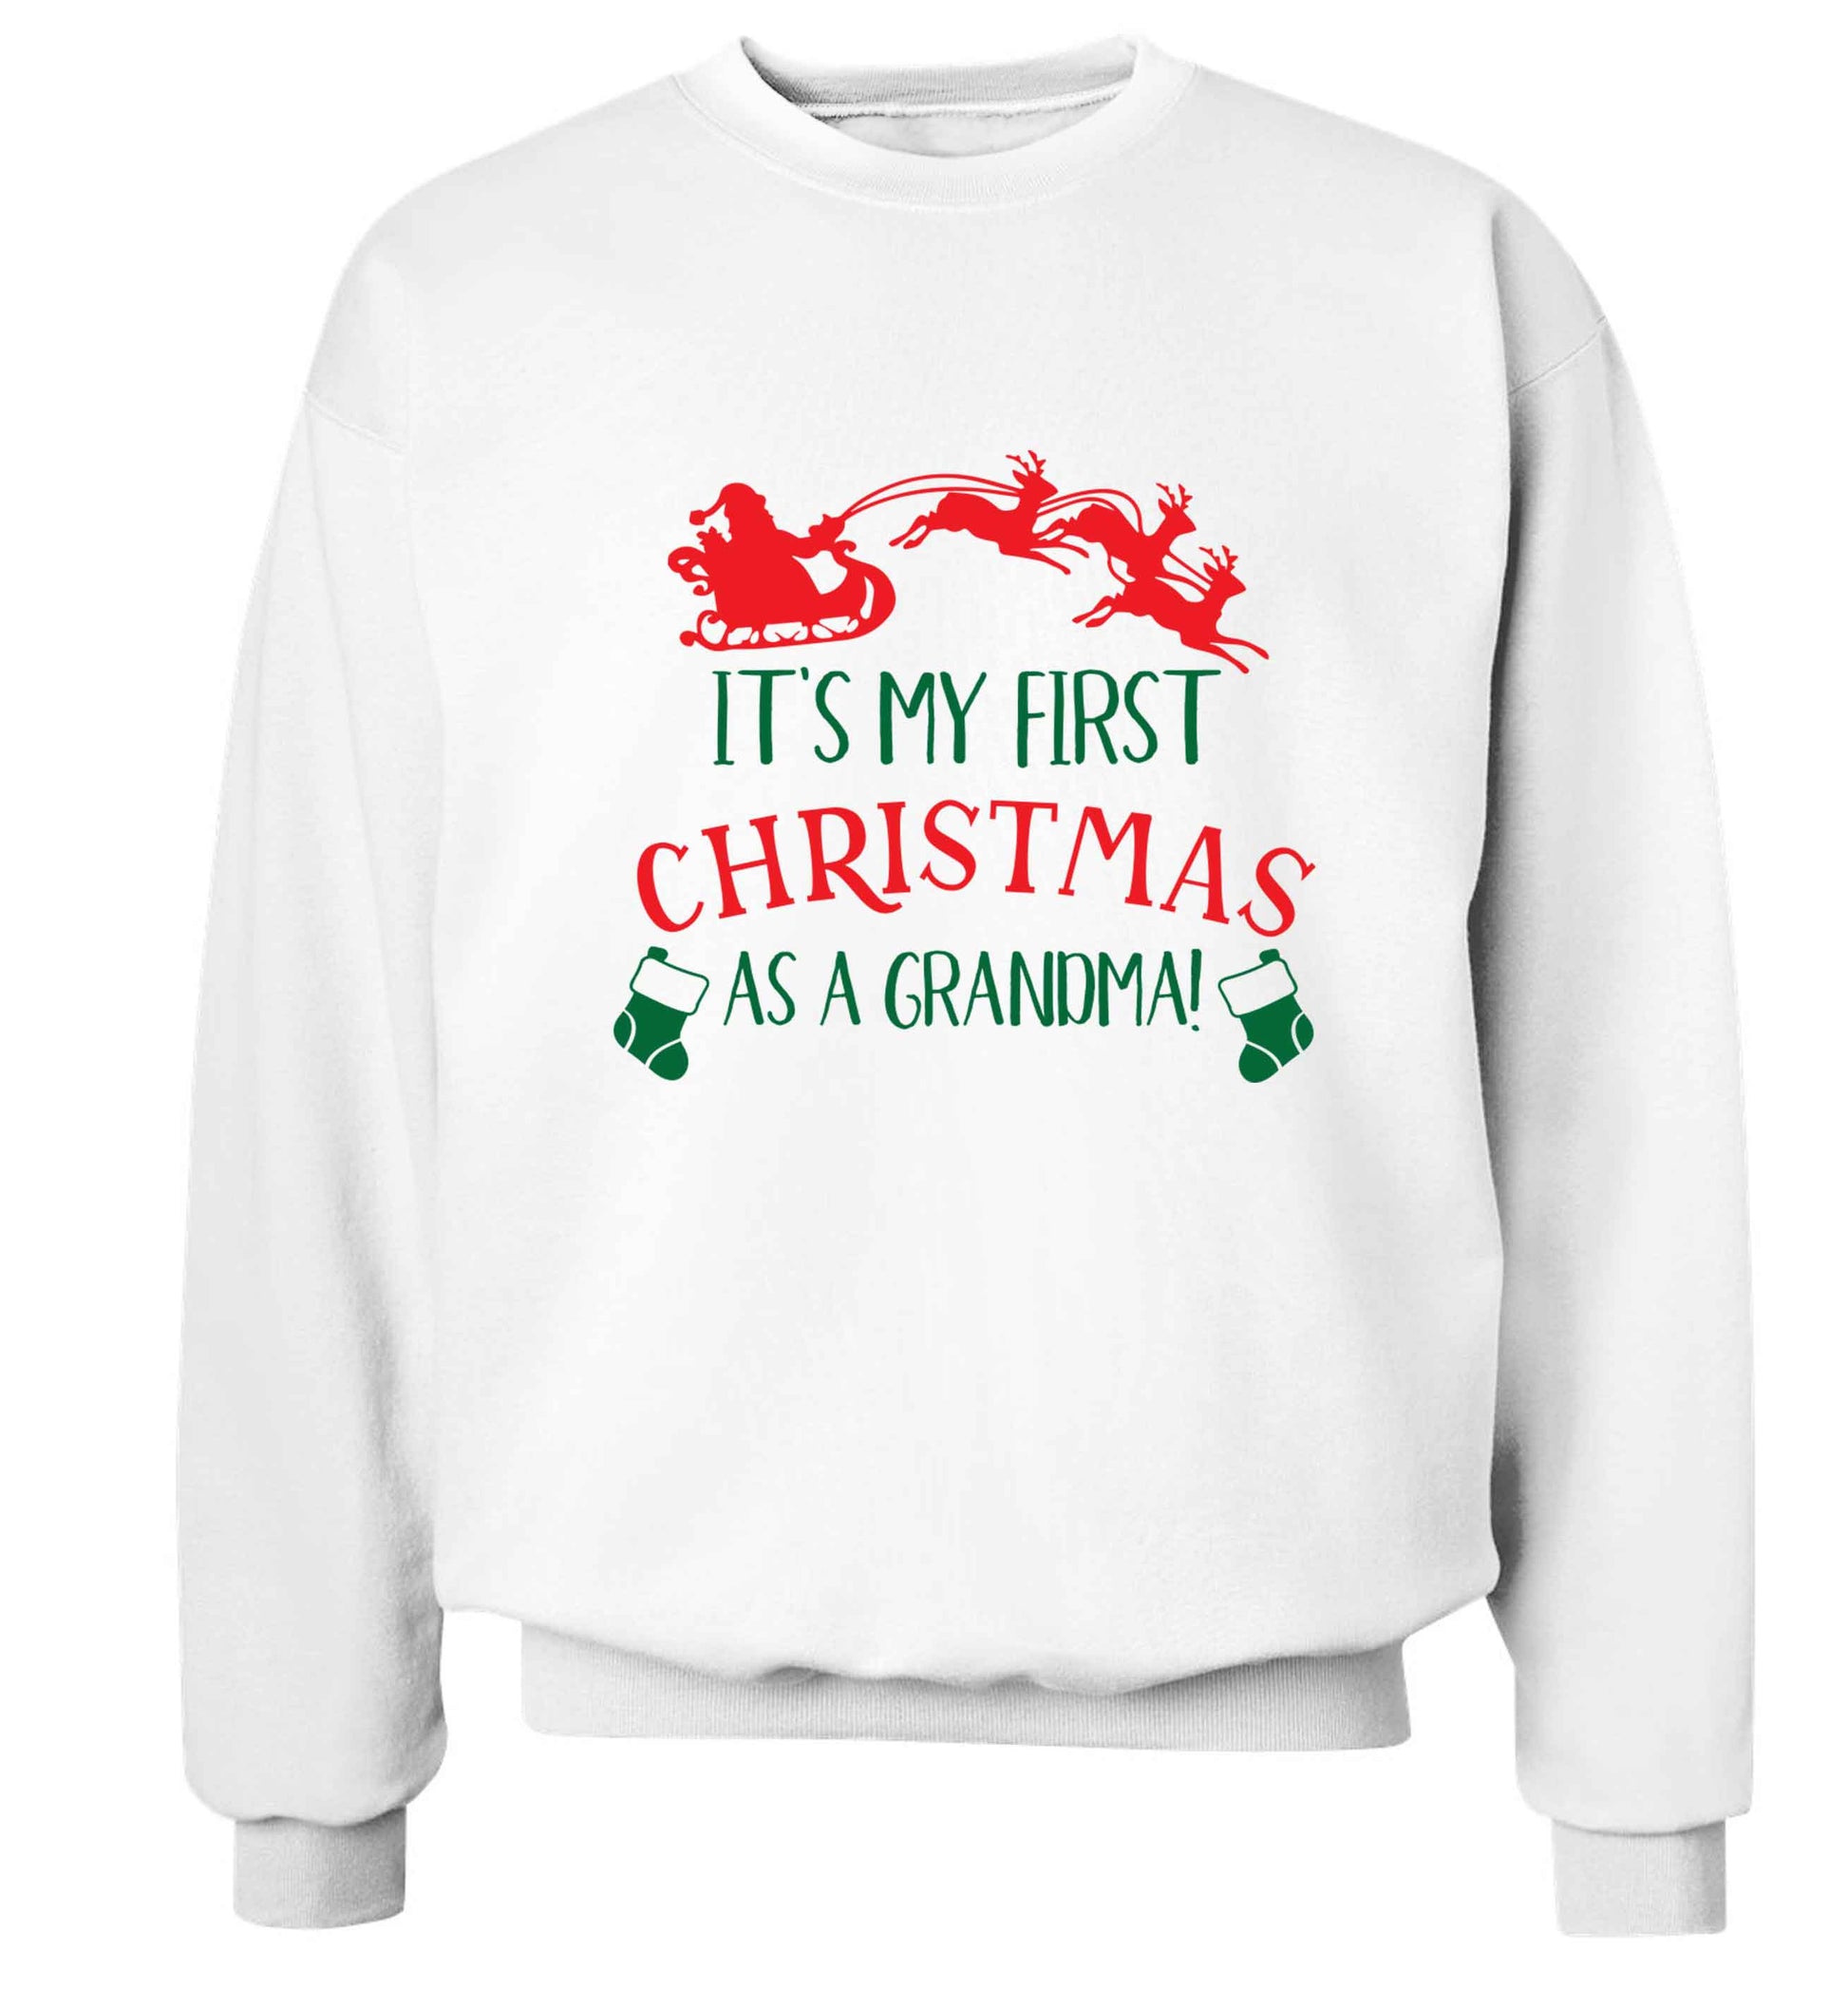 It's my first Christmas as a grandma! Adult's unisex white Sweater 2XL